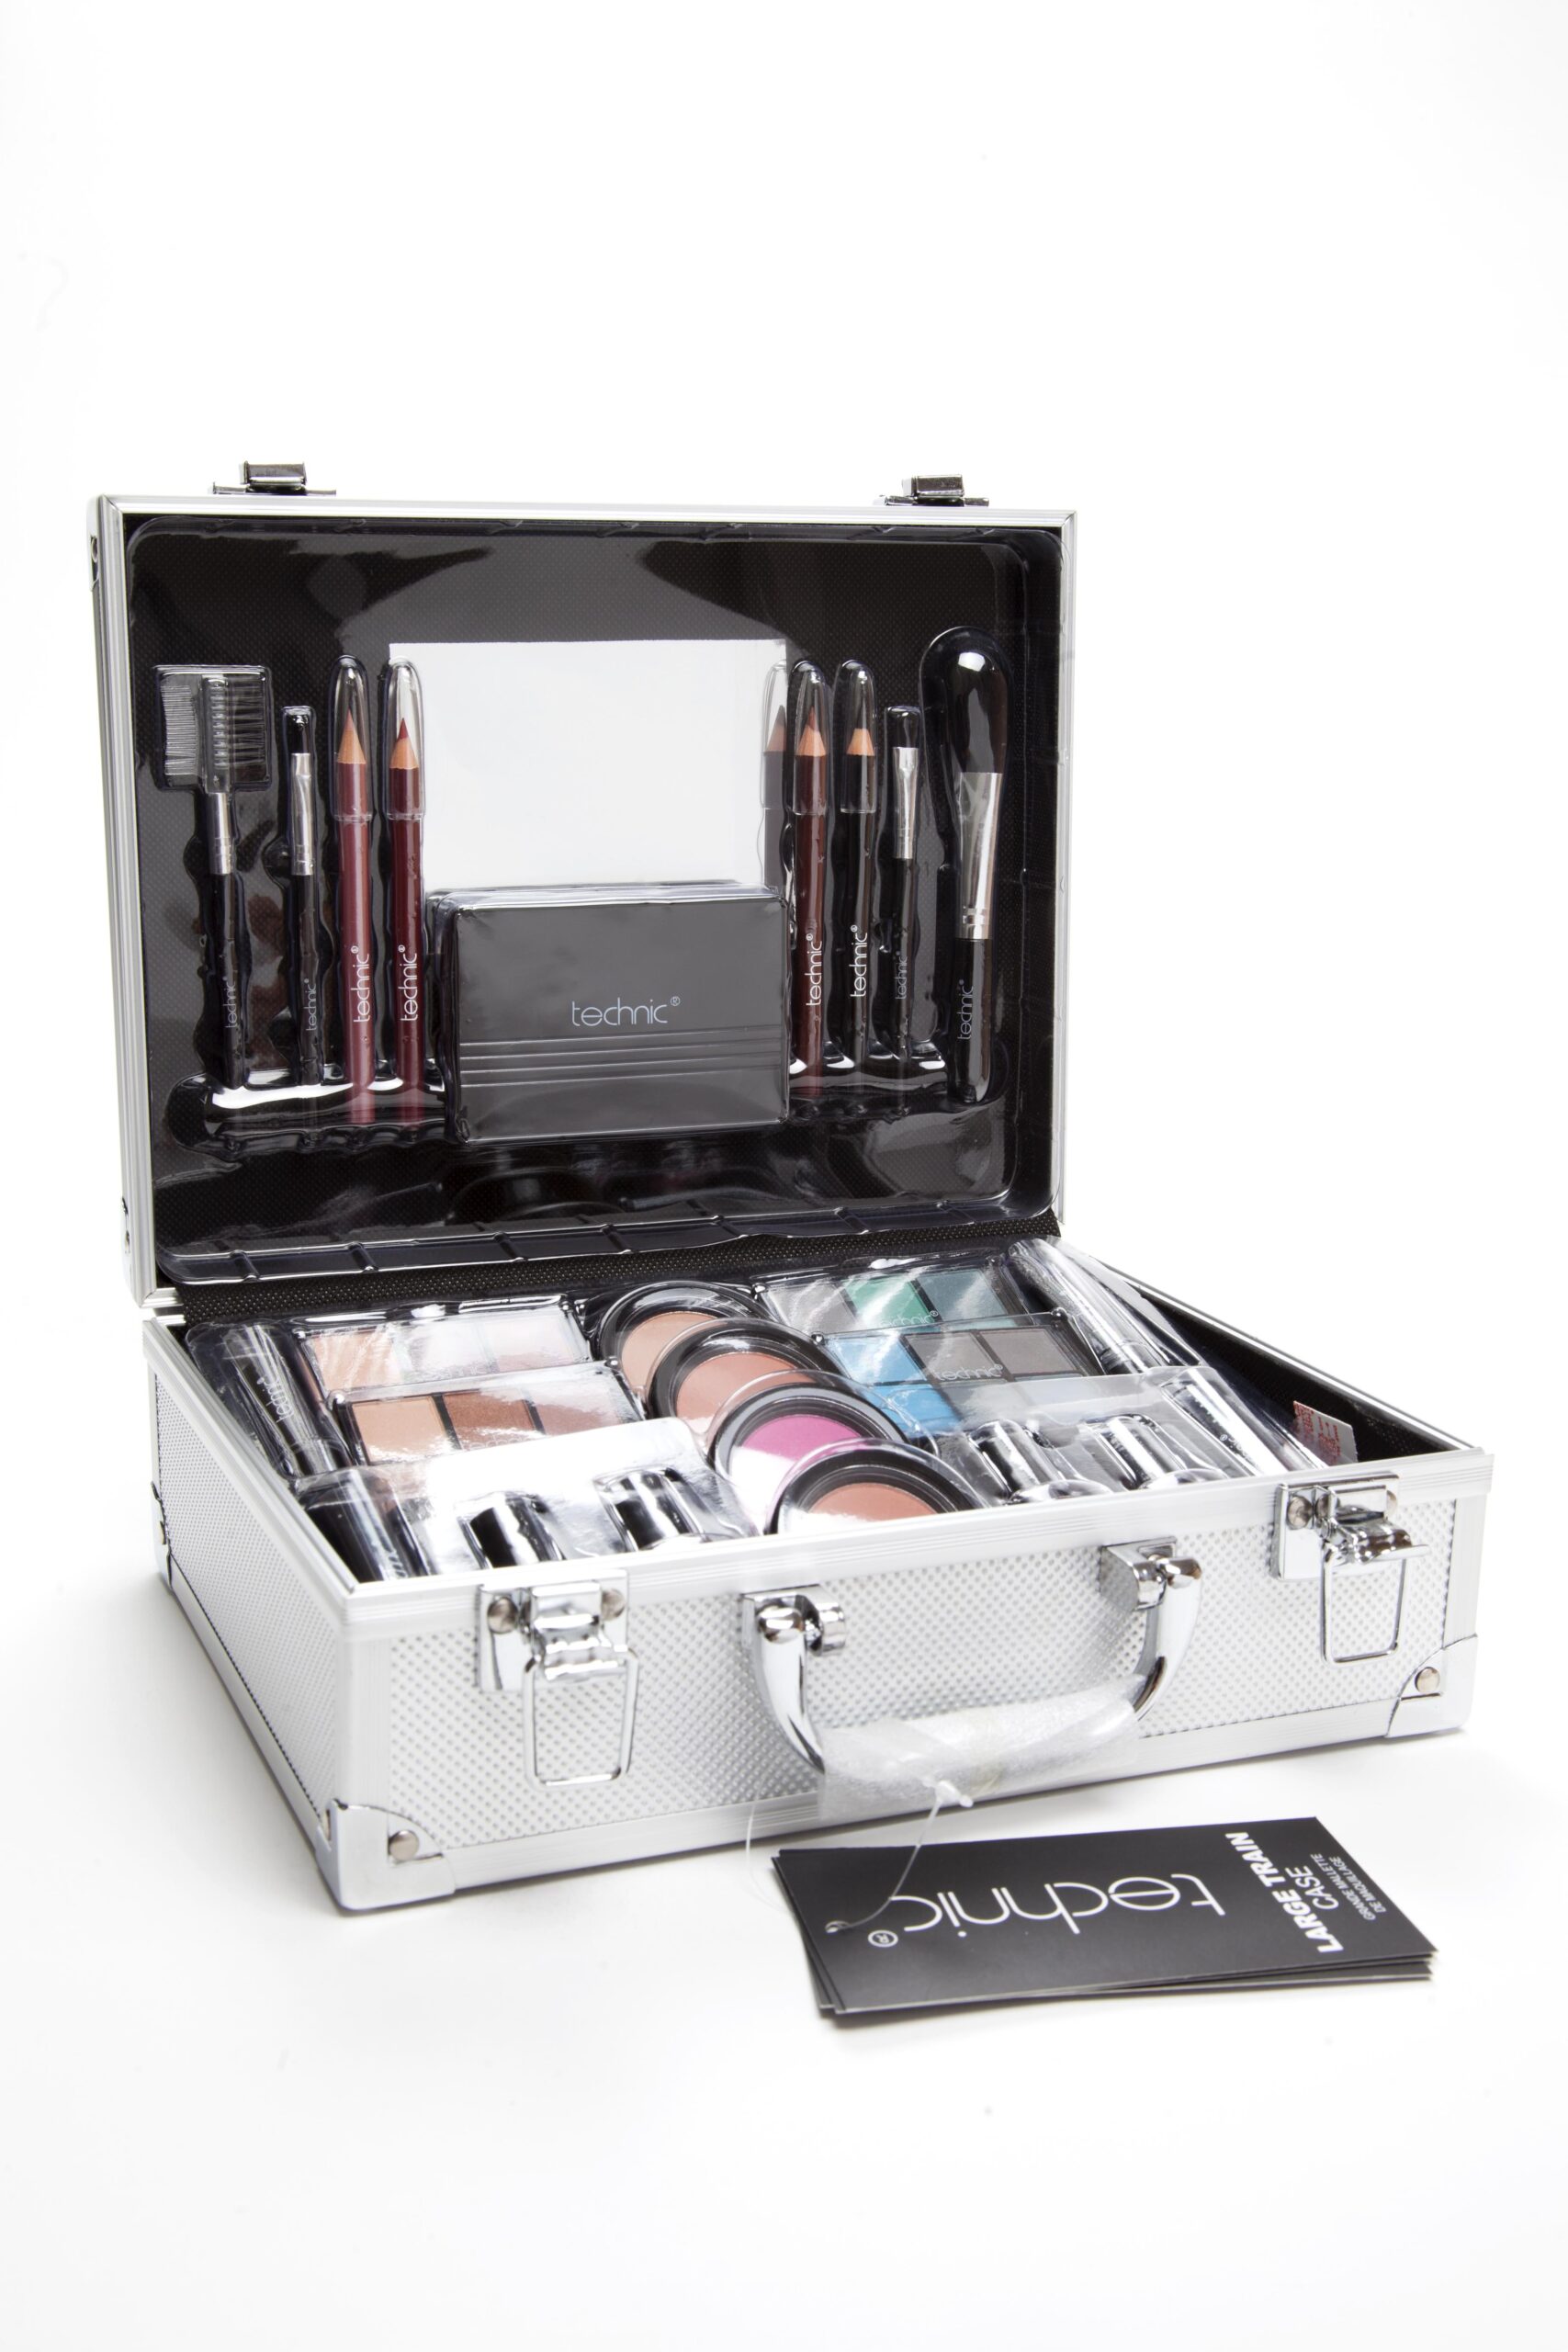 Technic Cosmetics Clear Beauty Case Large - Malette maquillage, 35